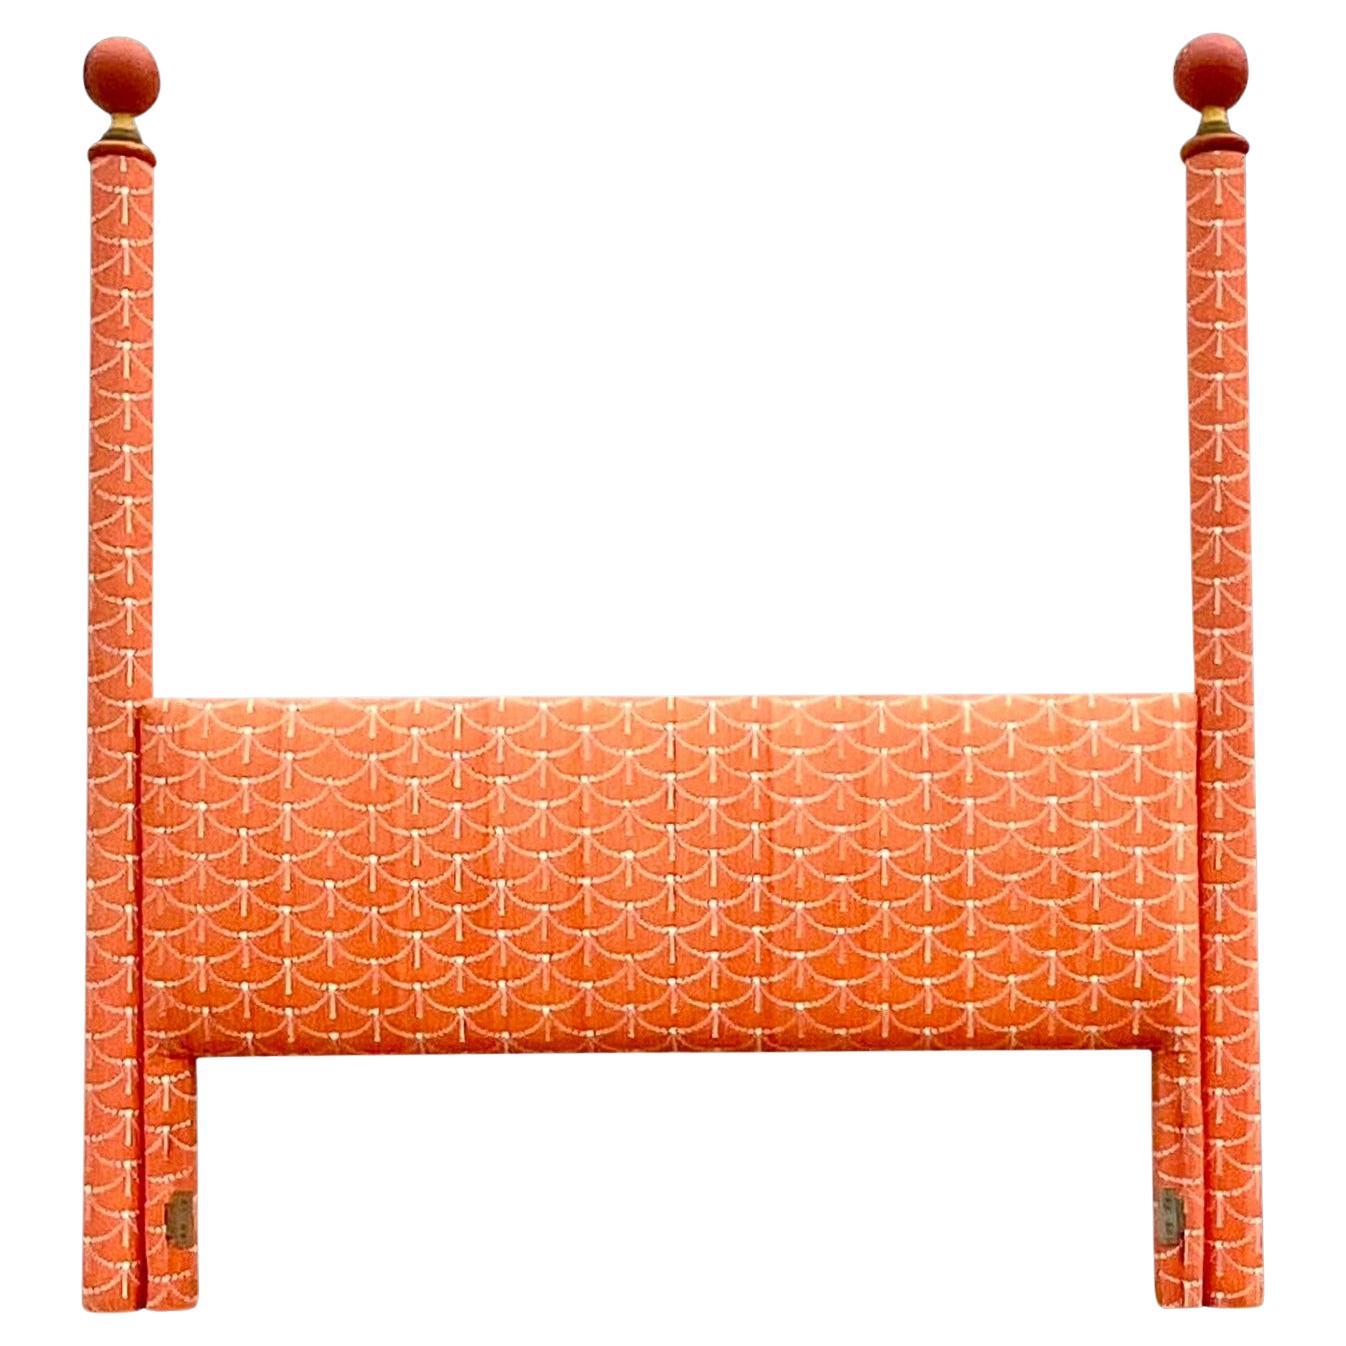 Upholstered King Headboard With Hand Painted Cannon Ball Finials For Sale